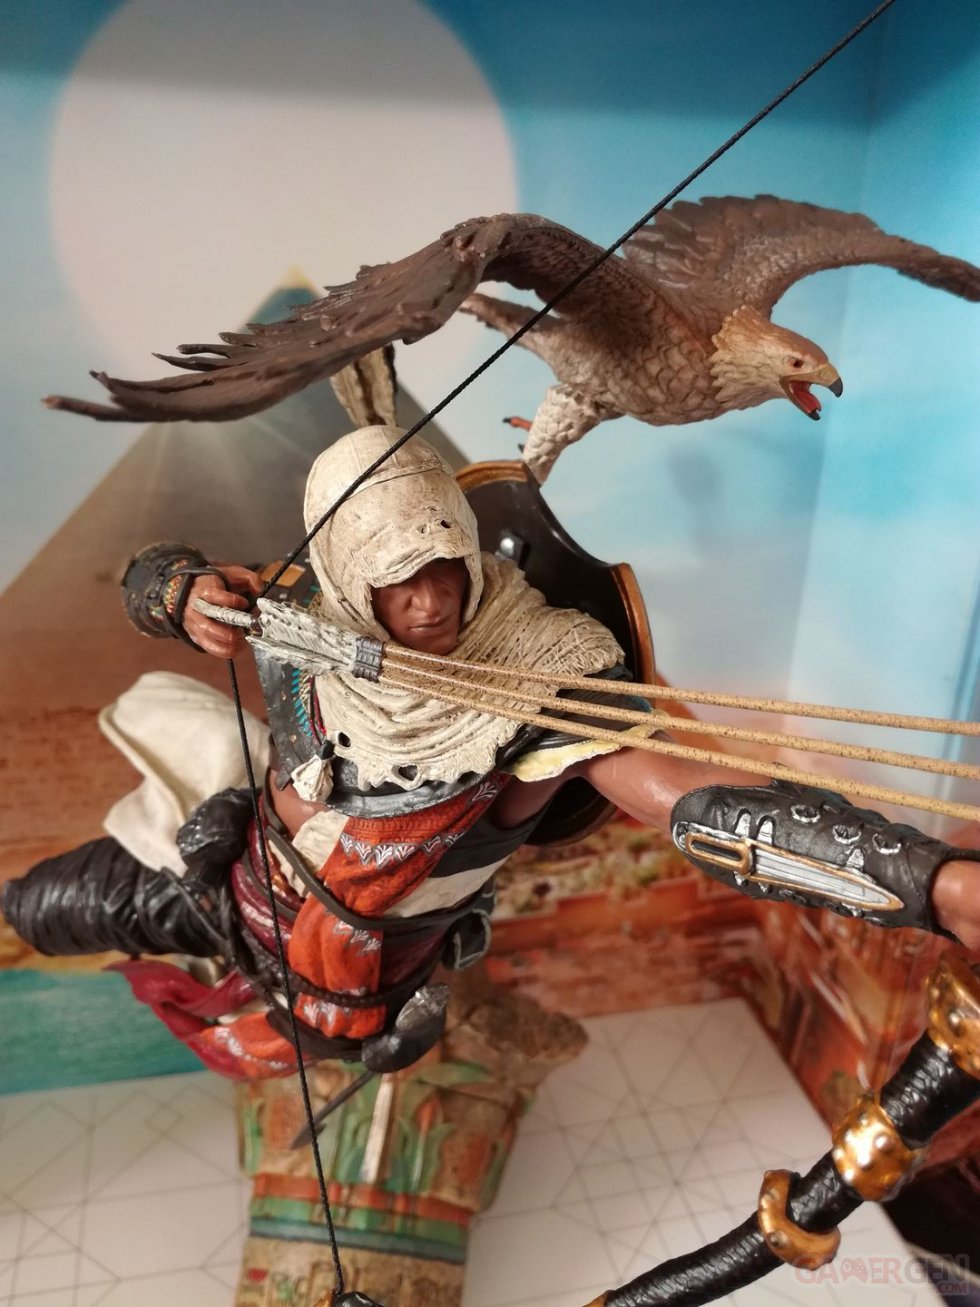 Assassin-Creed-Origins-collector-Dawn-of-the-Creed-unboxing-déballage-59-31-10-2017